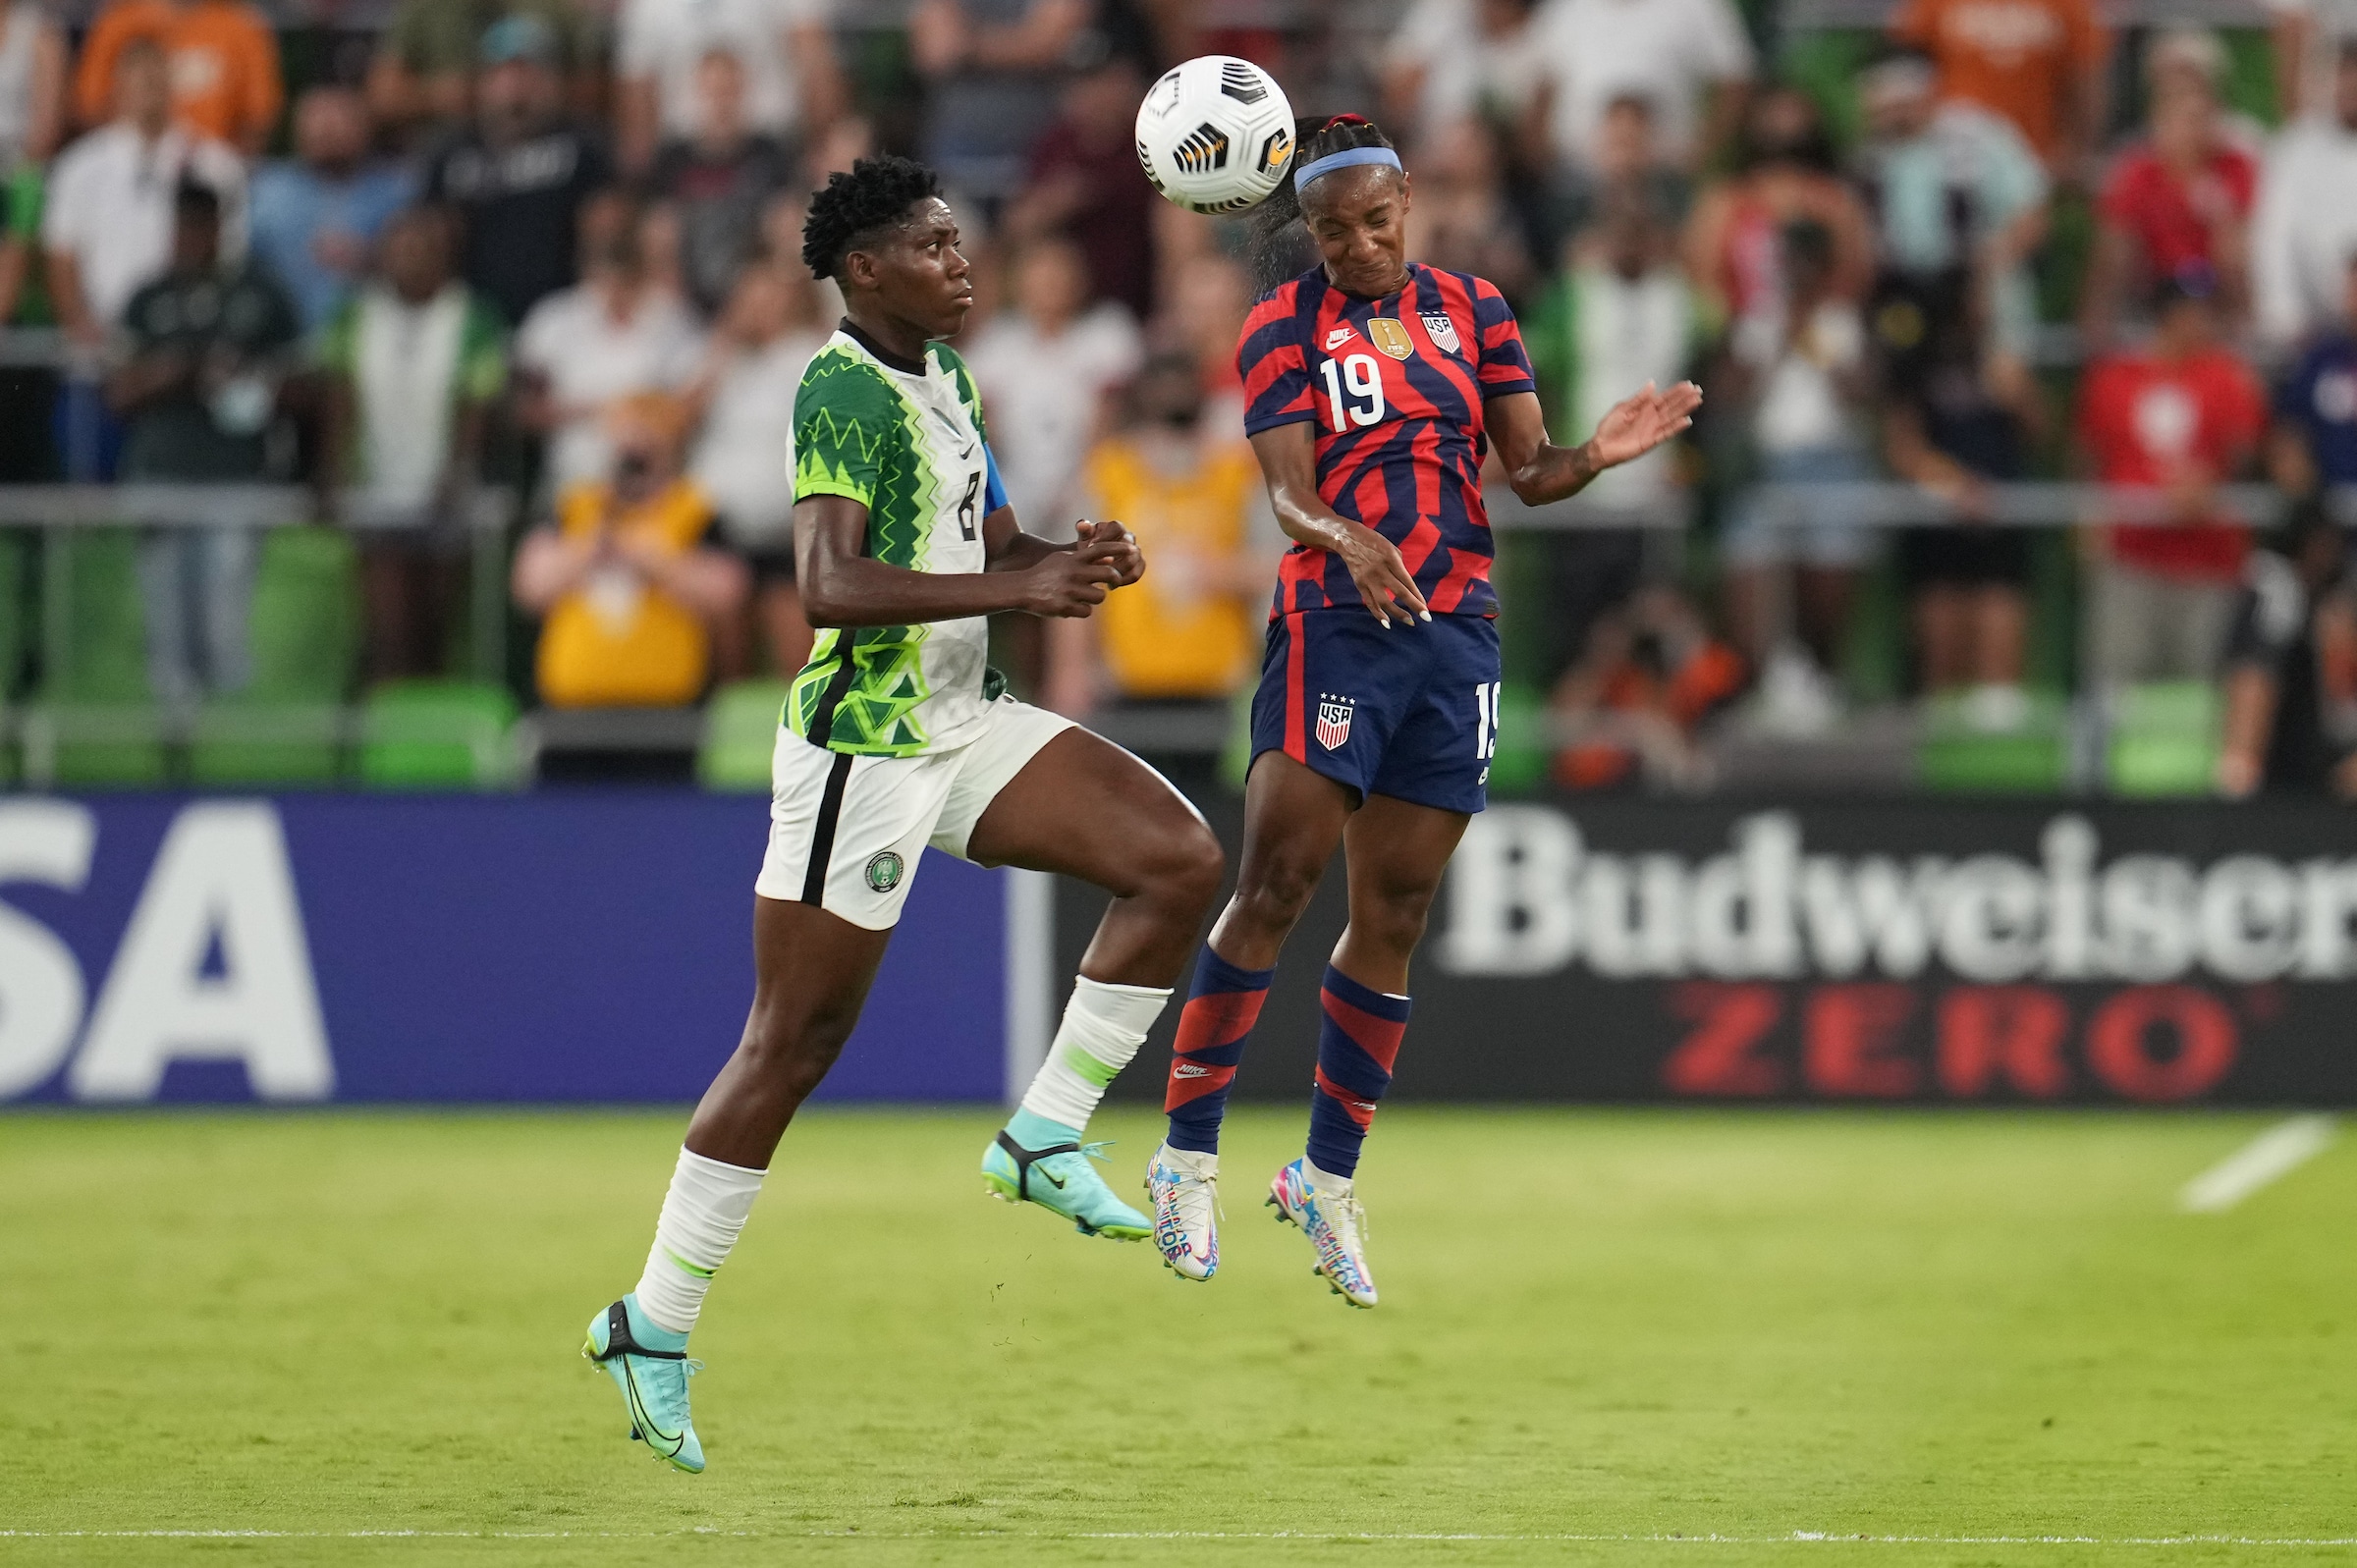 USA Wins Summer Series After Defeating Super Falcons 